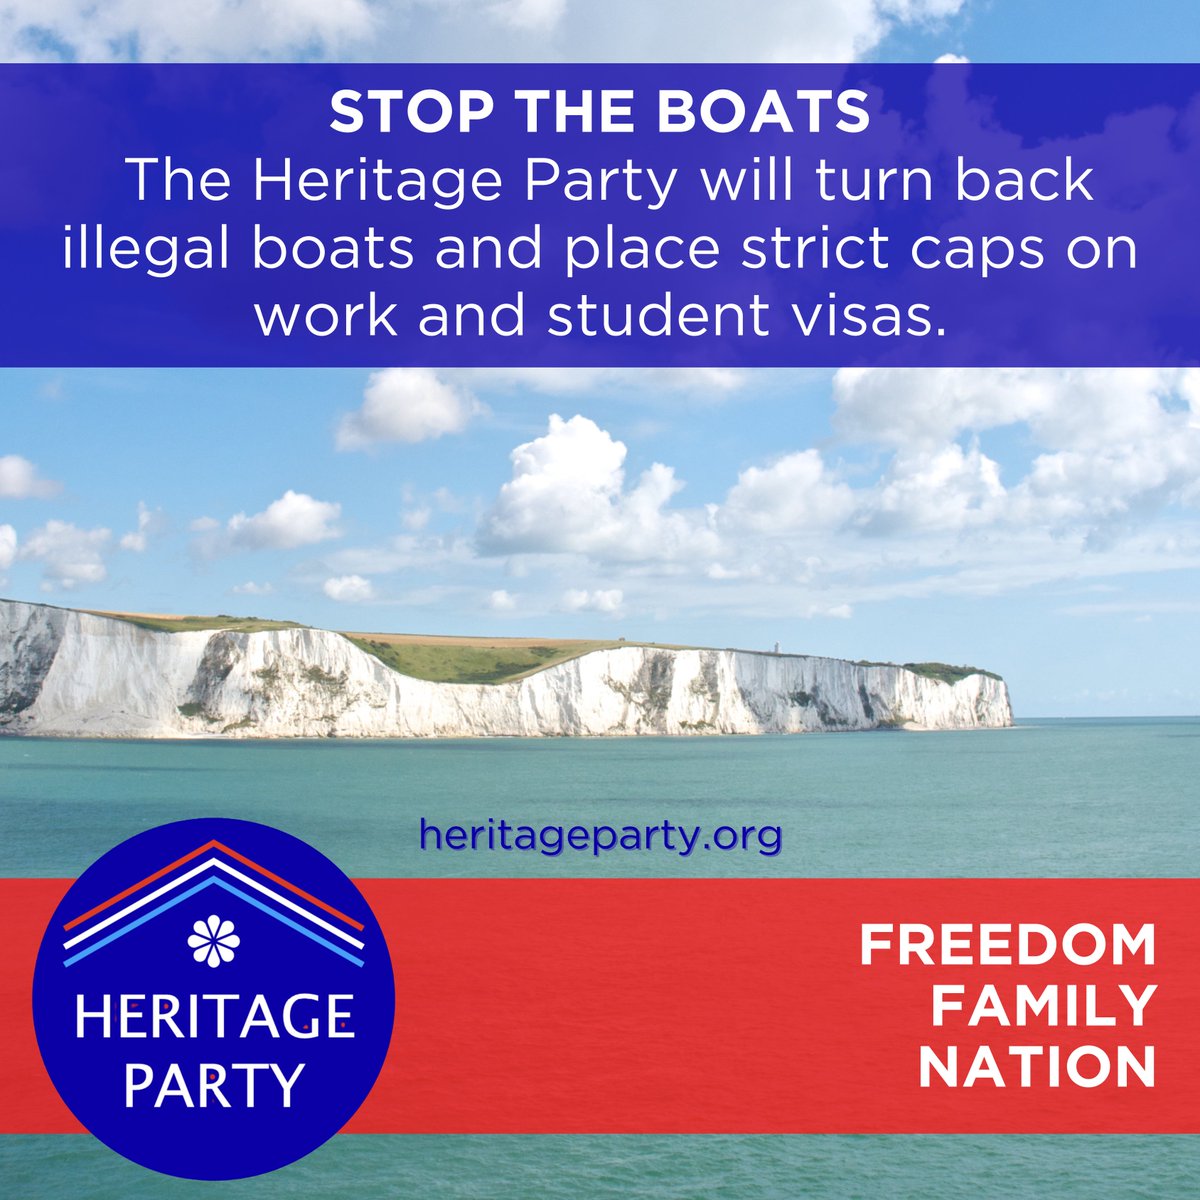 CONTROL OUR BORDERS. Join the HERITAGE PARTY to STOP THE BOATS. heritageparty.org